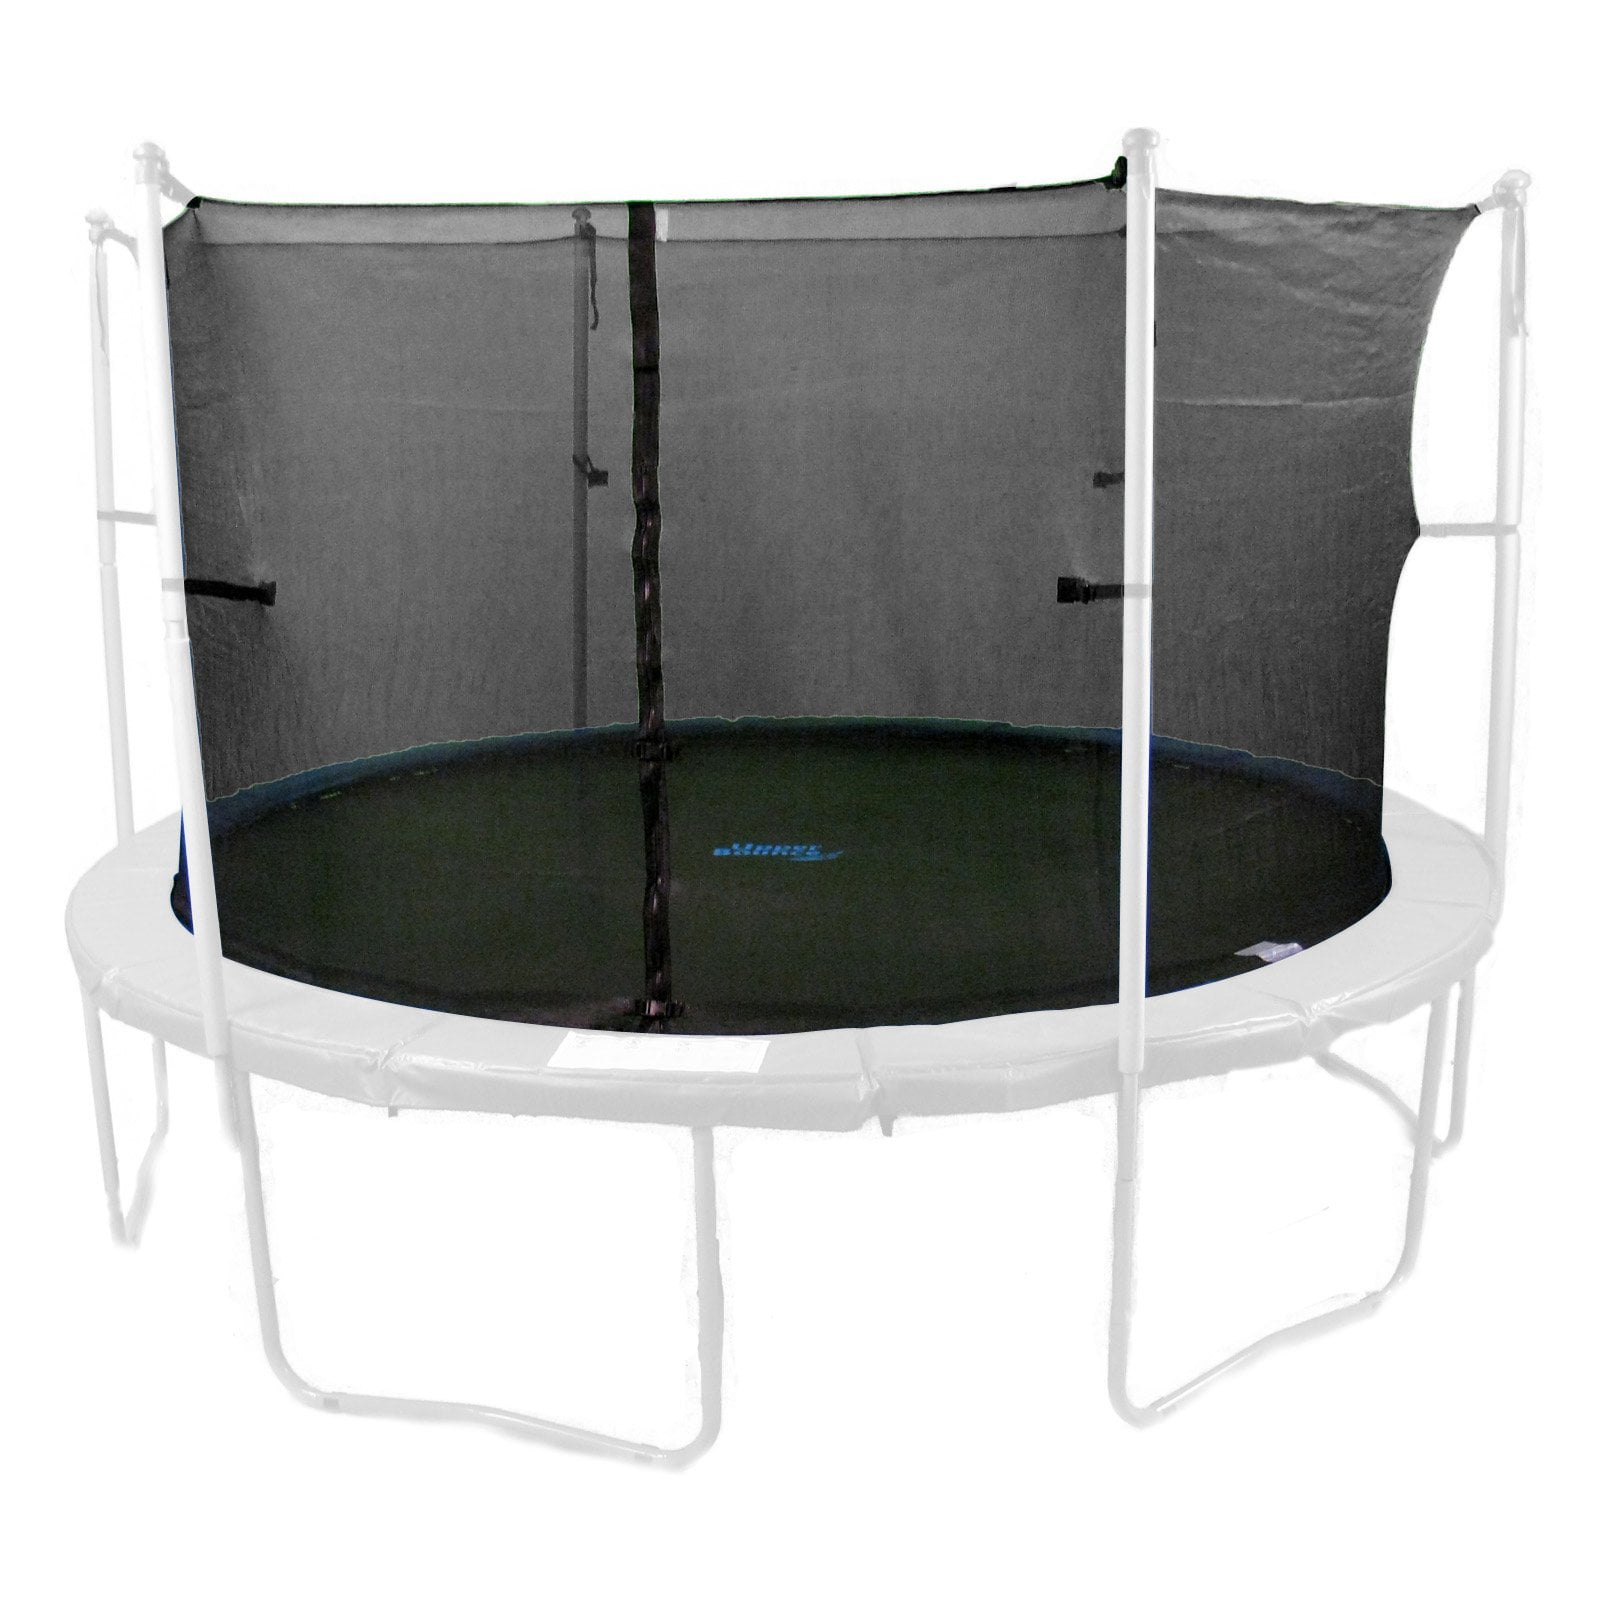 With Adju... Trampoline Replacement Enclosure Net Round Frames Fits For 14 FT 